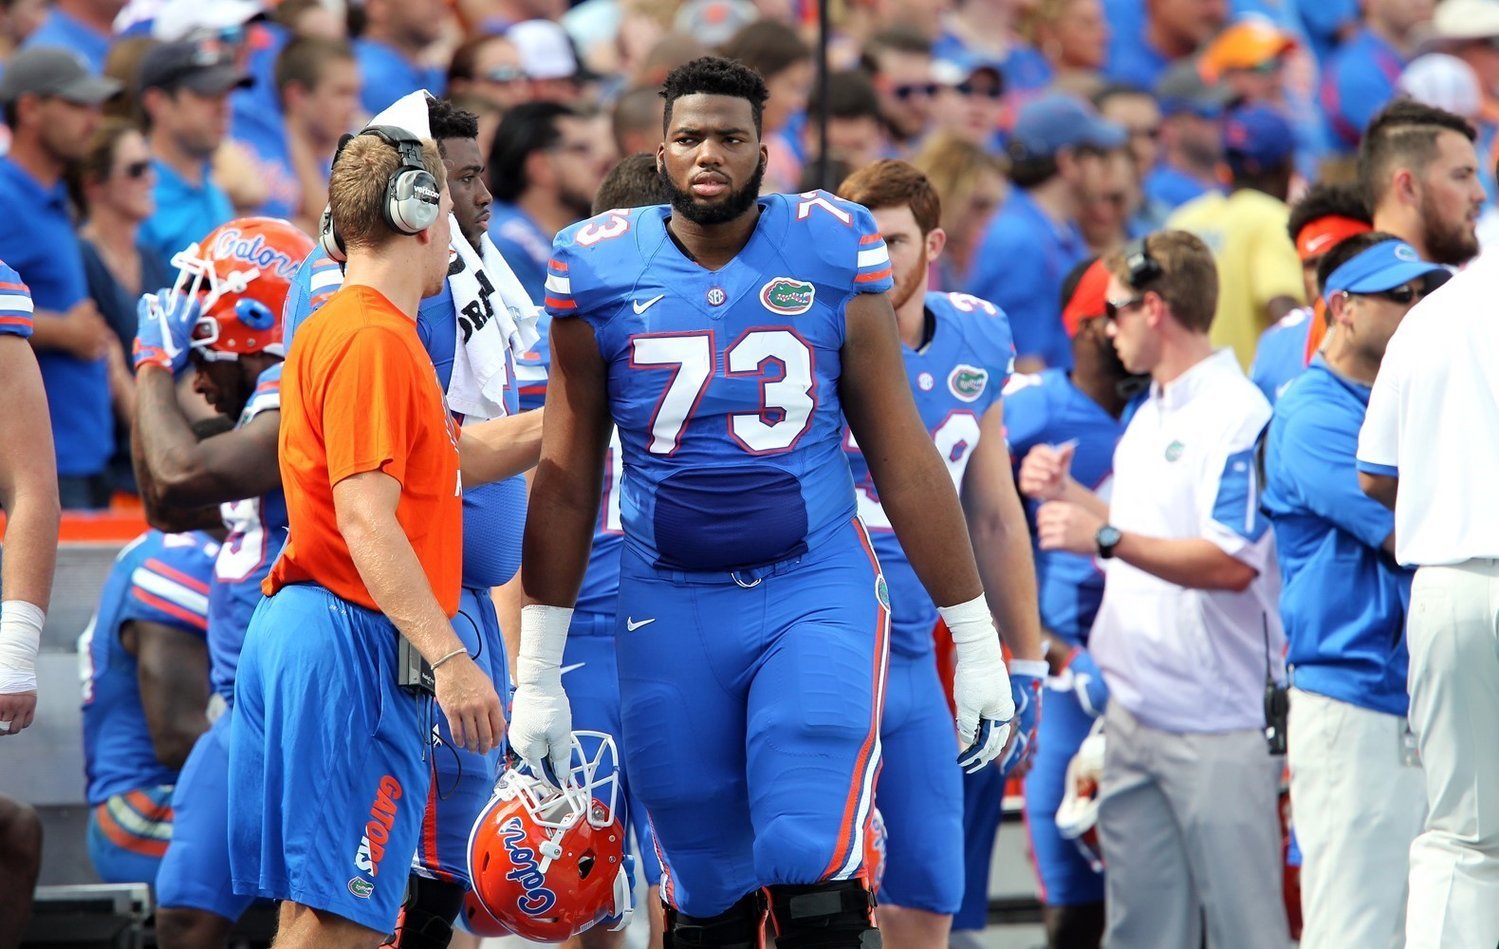 Martez Ivey, the former Apopka Blue Darter and Florida Gator, will be playing in the Canadian Football League this season.